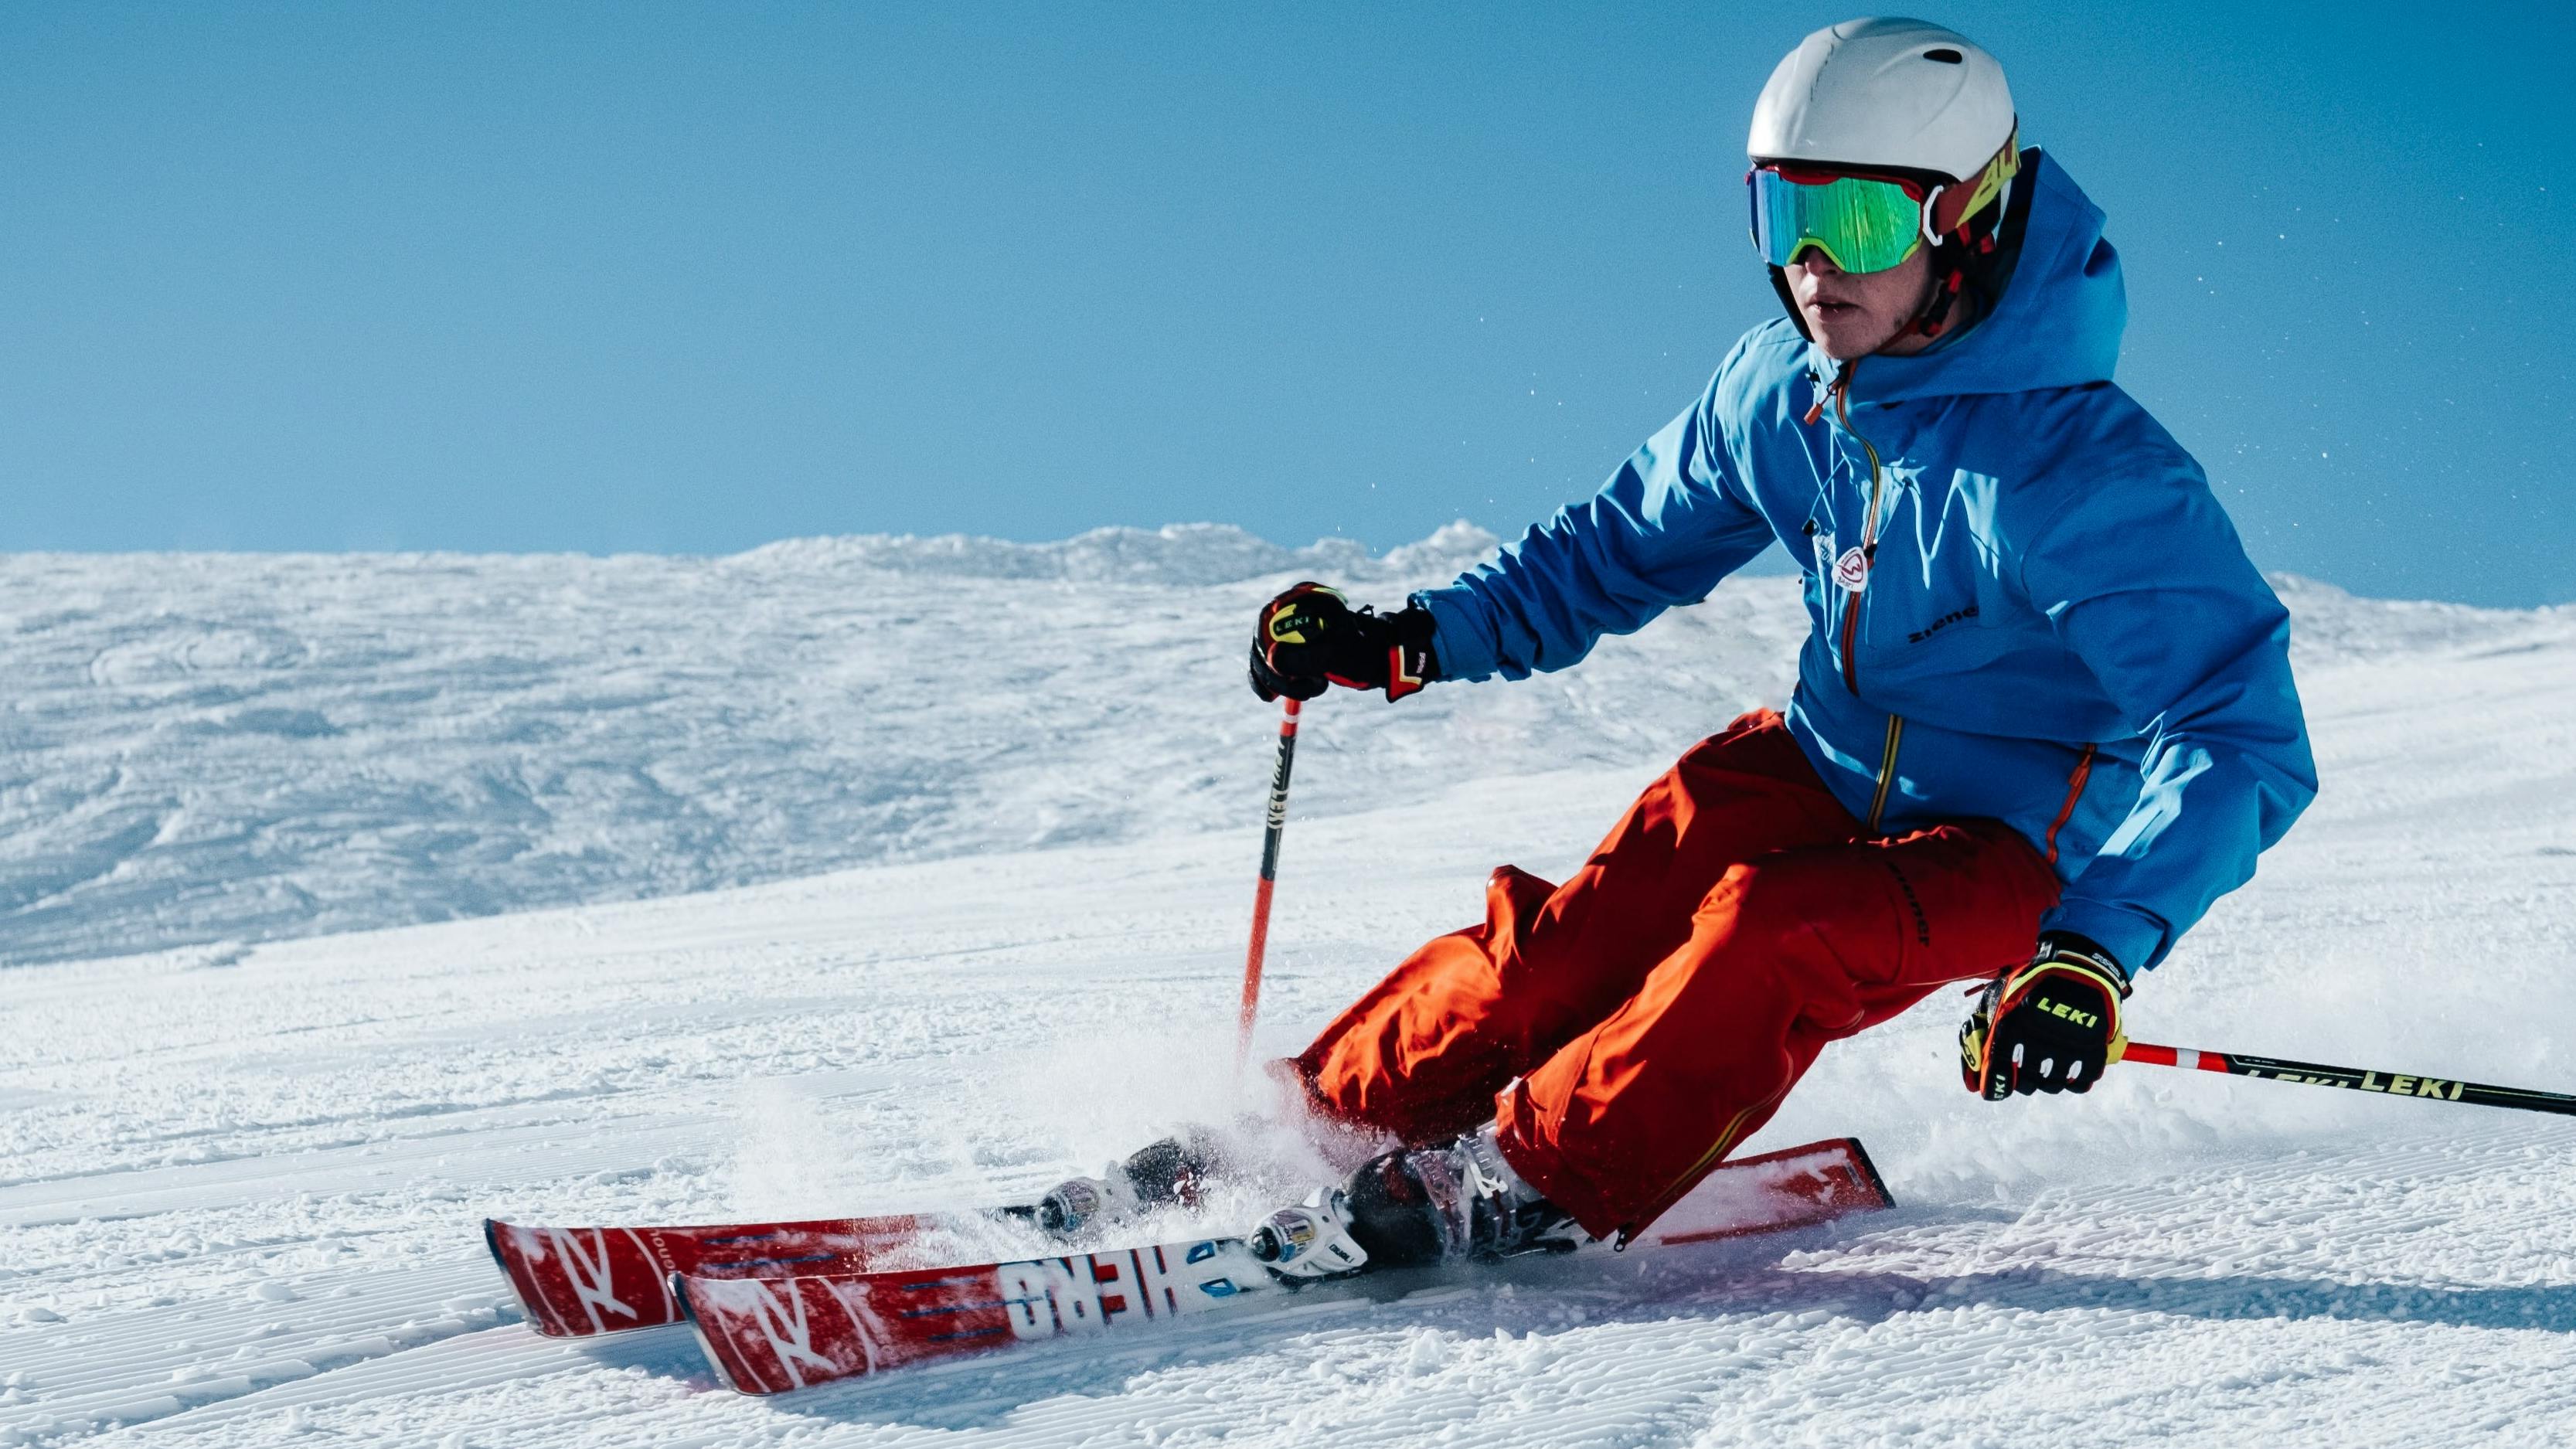 An expert skier arcing beautiful turn on Rossignol carving skis.  